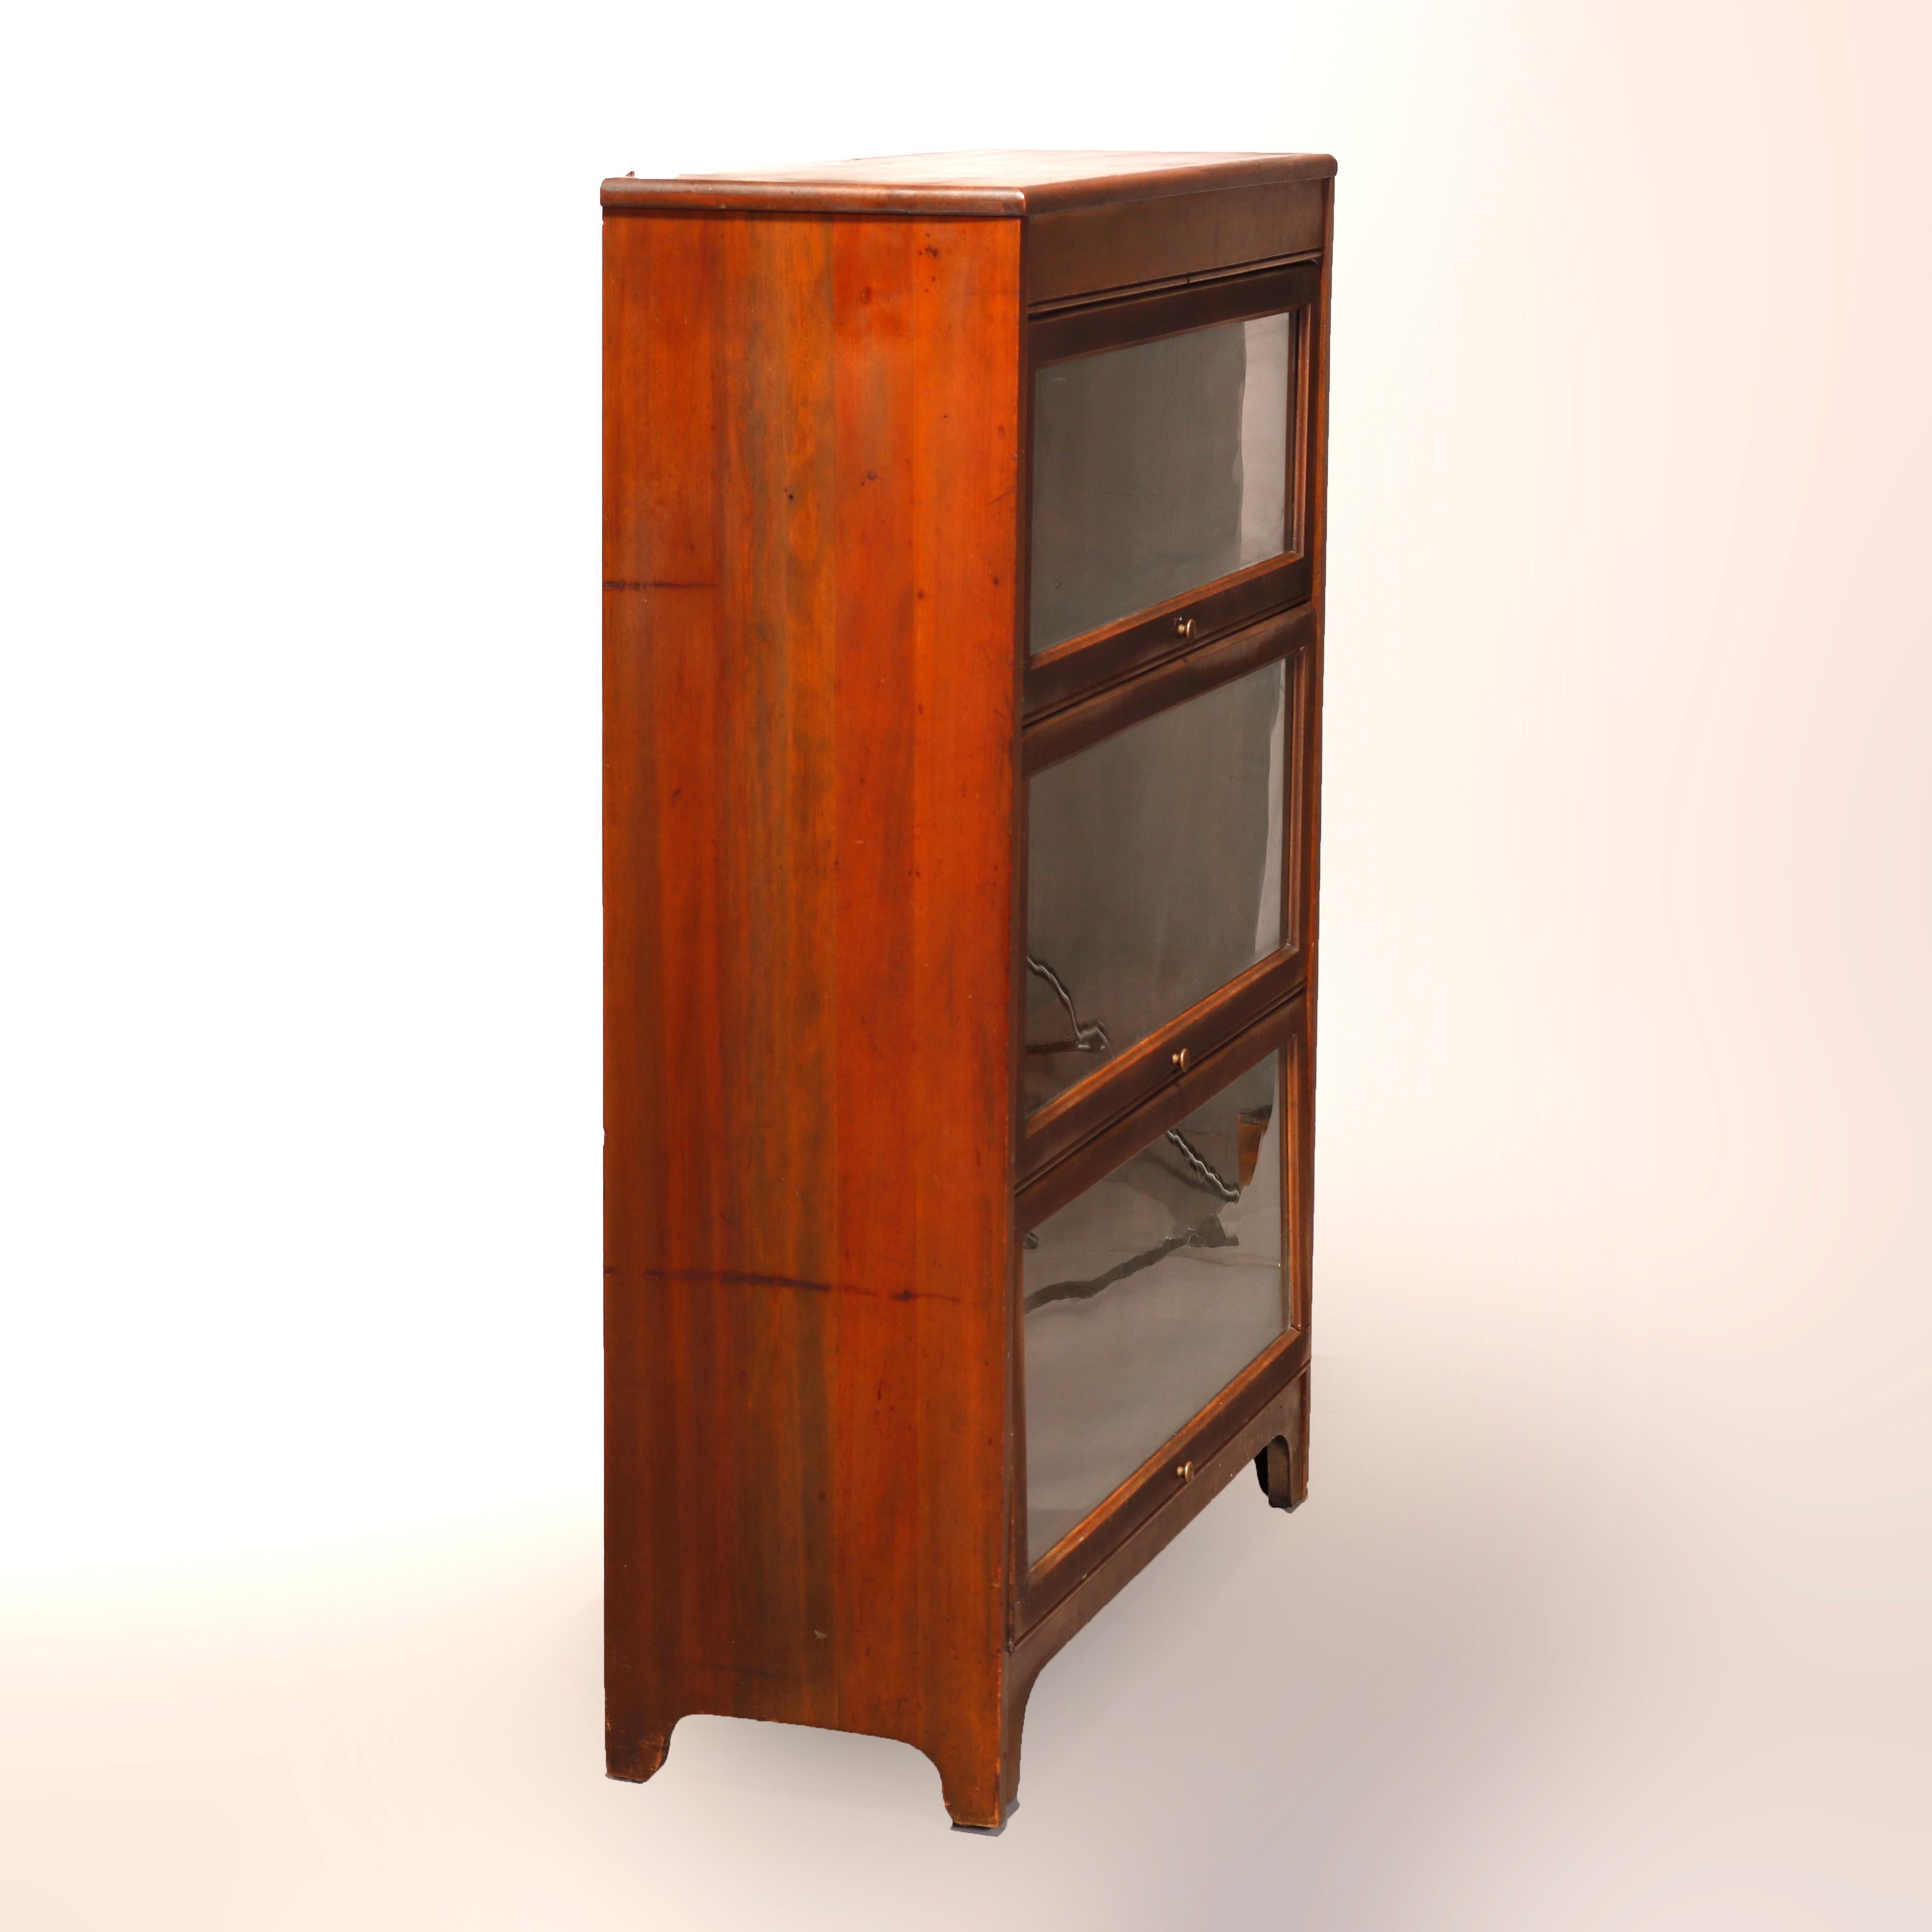 An antique Arts & Crafts Barrister bookcase in the manner of Globe Wernicke offers mahogany with three stacks with pull out glass doors, raised on straight legs, circa 1910

Measures: 46.5